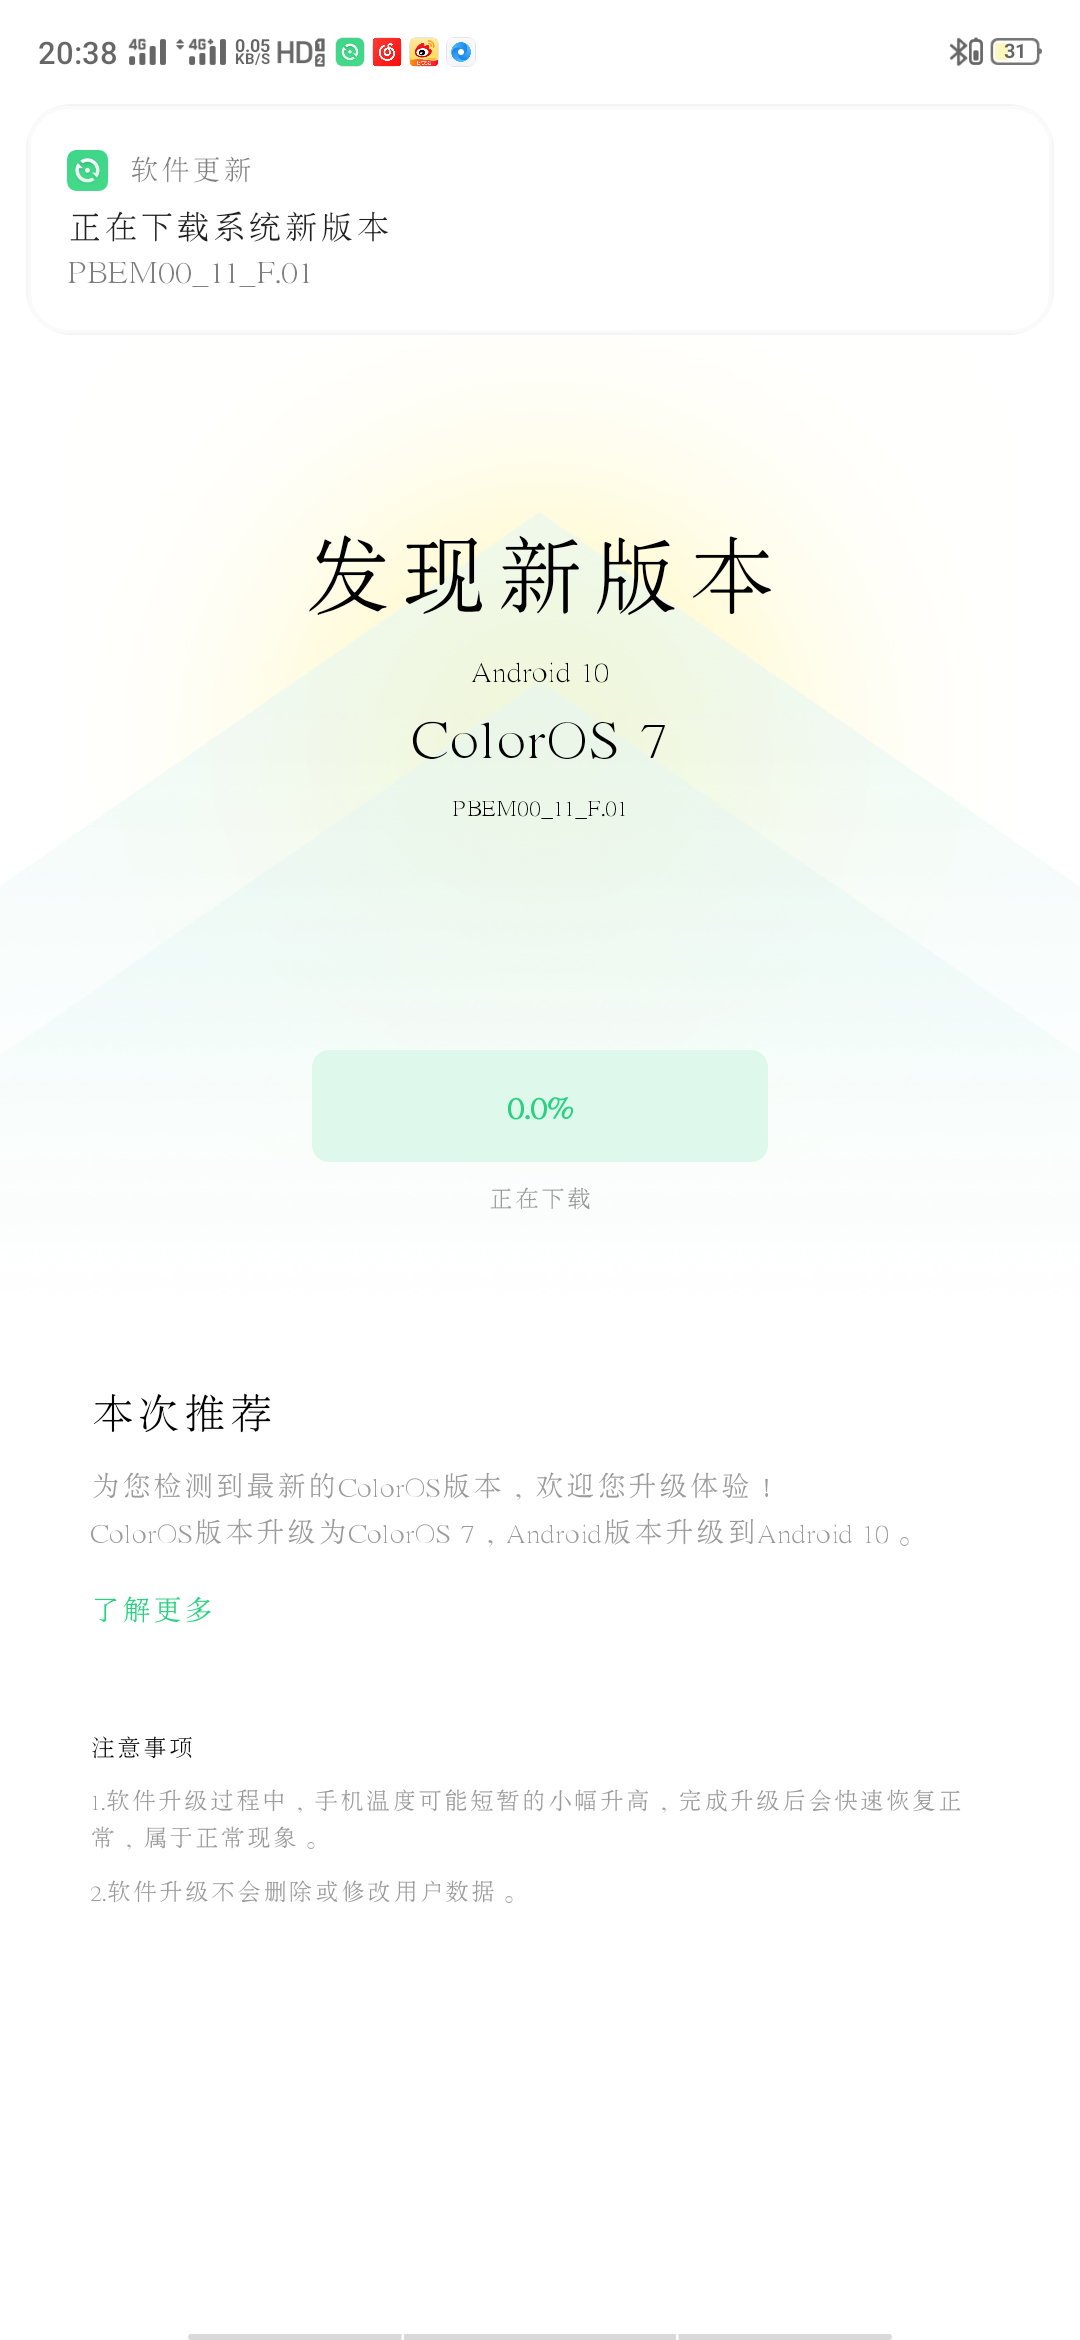 ColorOS 7 based on Android 10 for OPPO R17